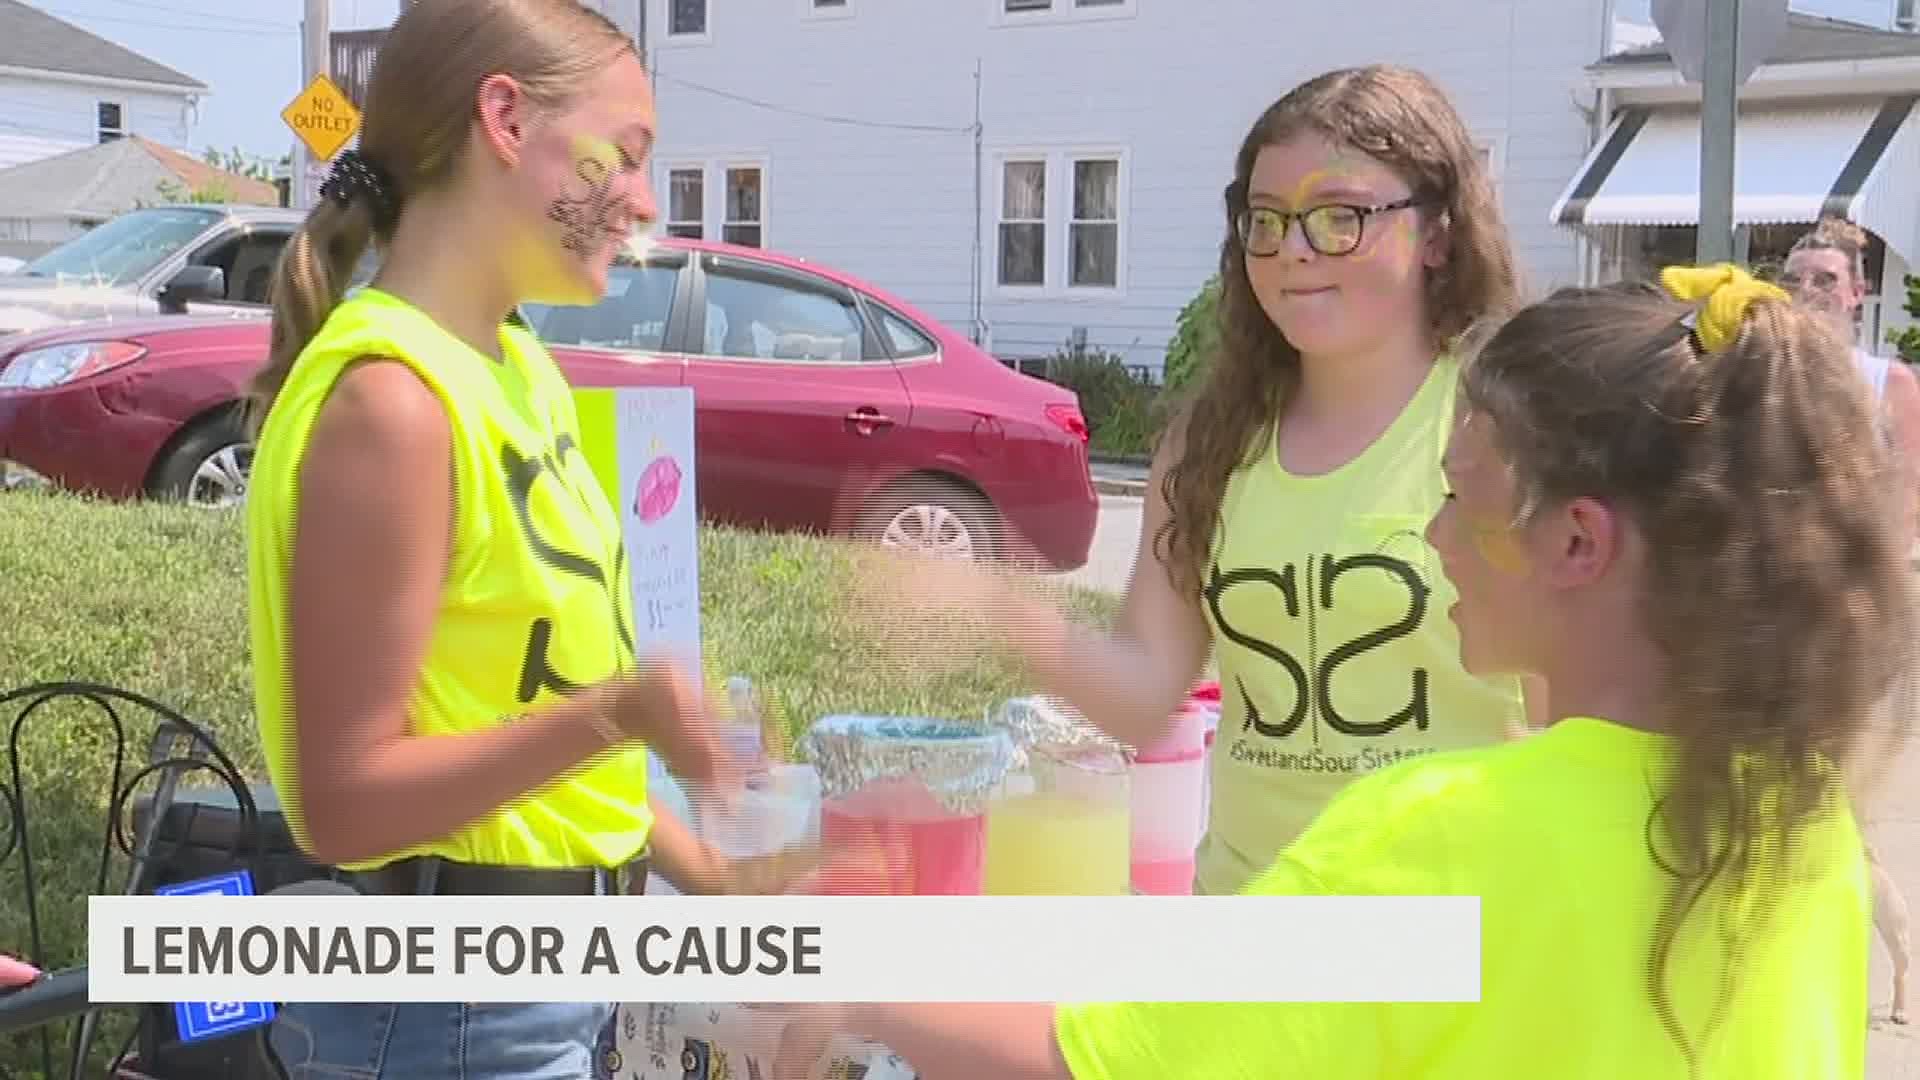 Three girls from Red Lion, PA are raising money for a great cause with their lemonade stand.